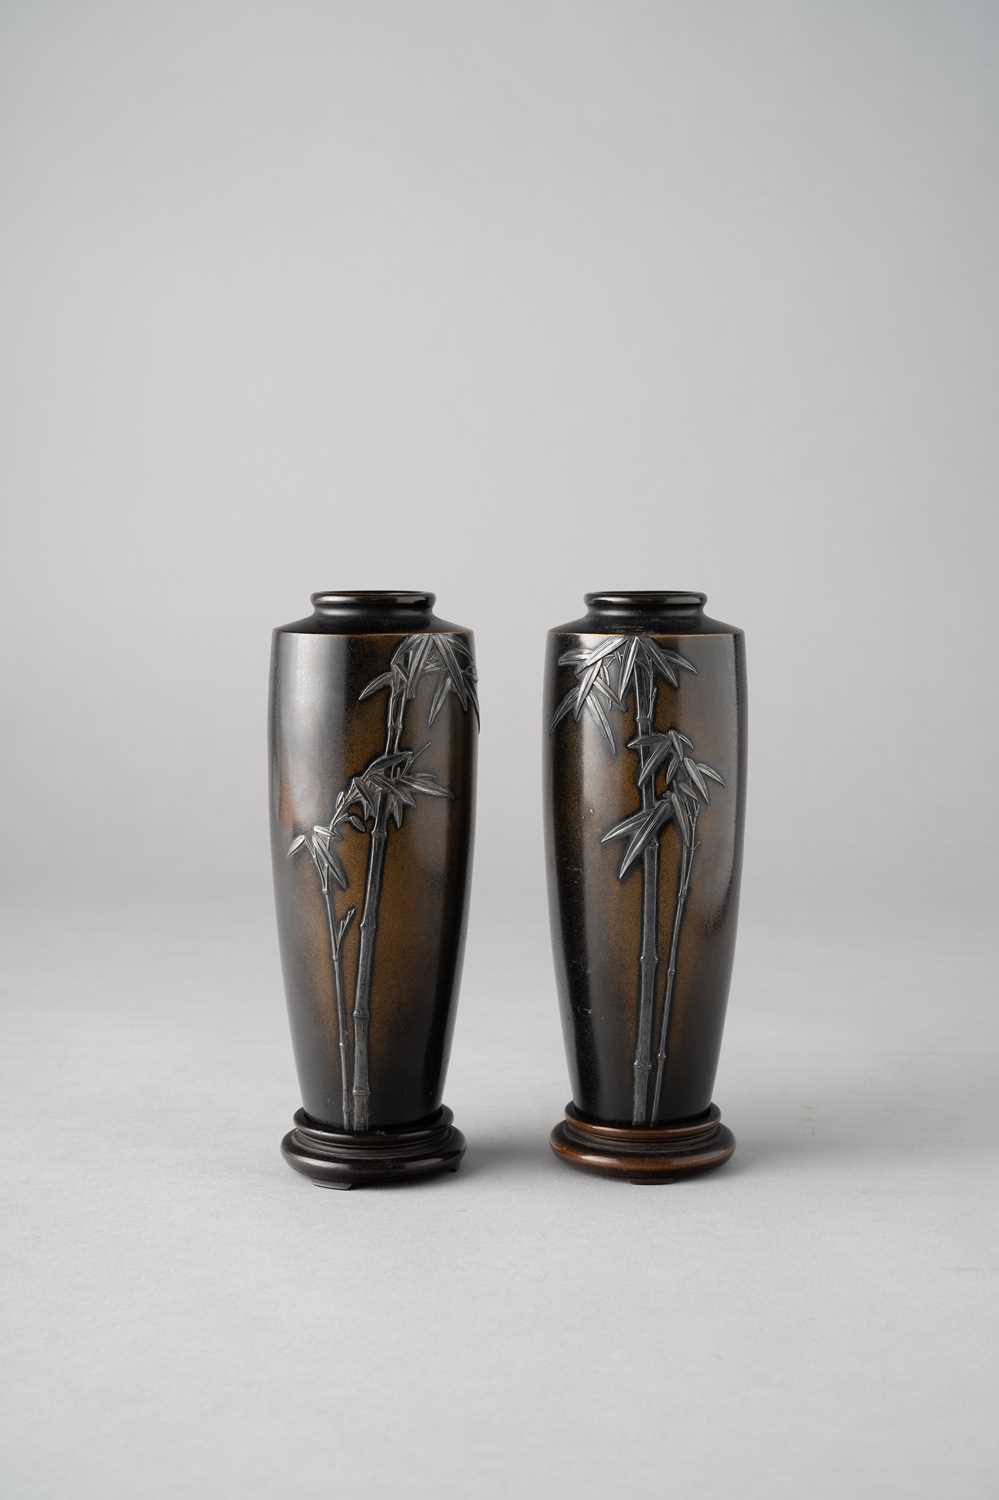 NO RESERVE A PAIR OF JAPANESE INLAID-BRONZE VASES BY THE NOGAWA COMPANY OF KYOTO MEIJI ERA, 19TH/